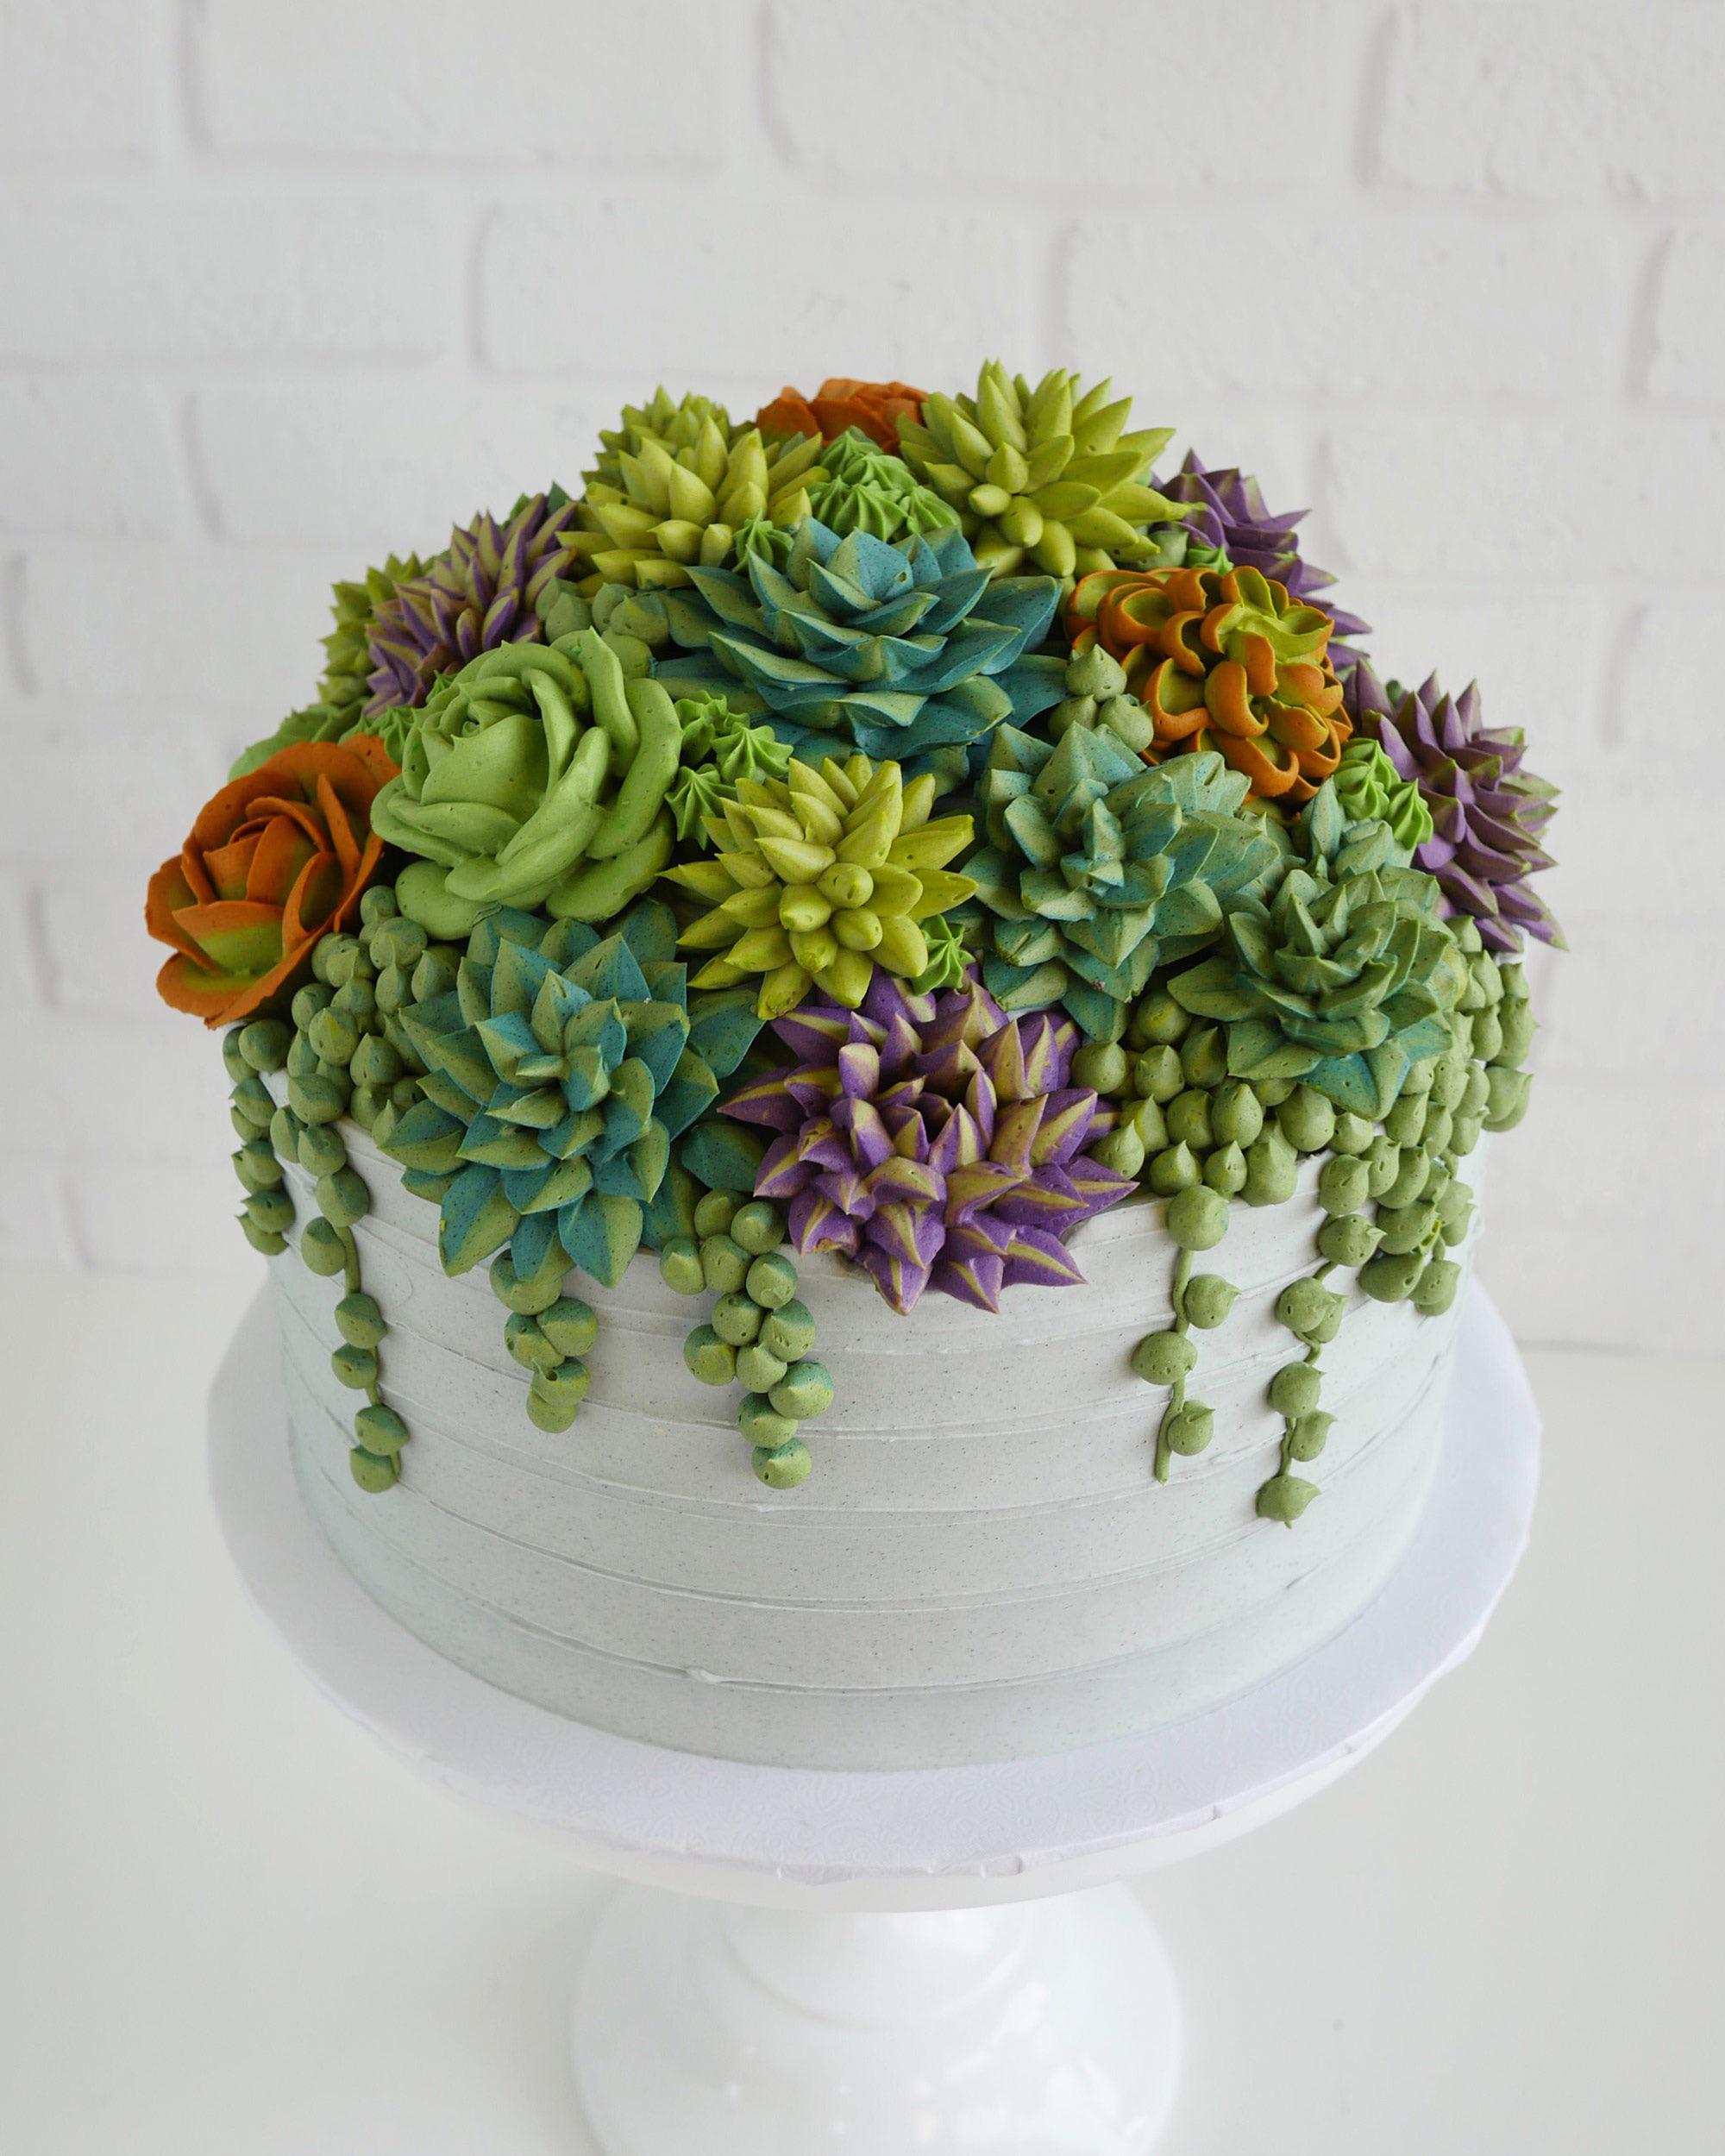 The+frosting+on+this+succulent+cake+looks+delicious%26%238230%3B